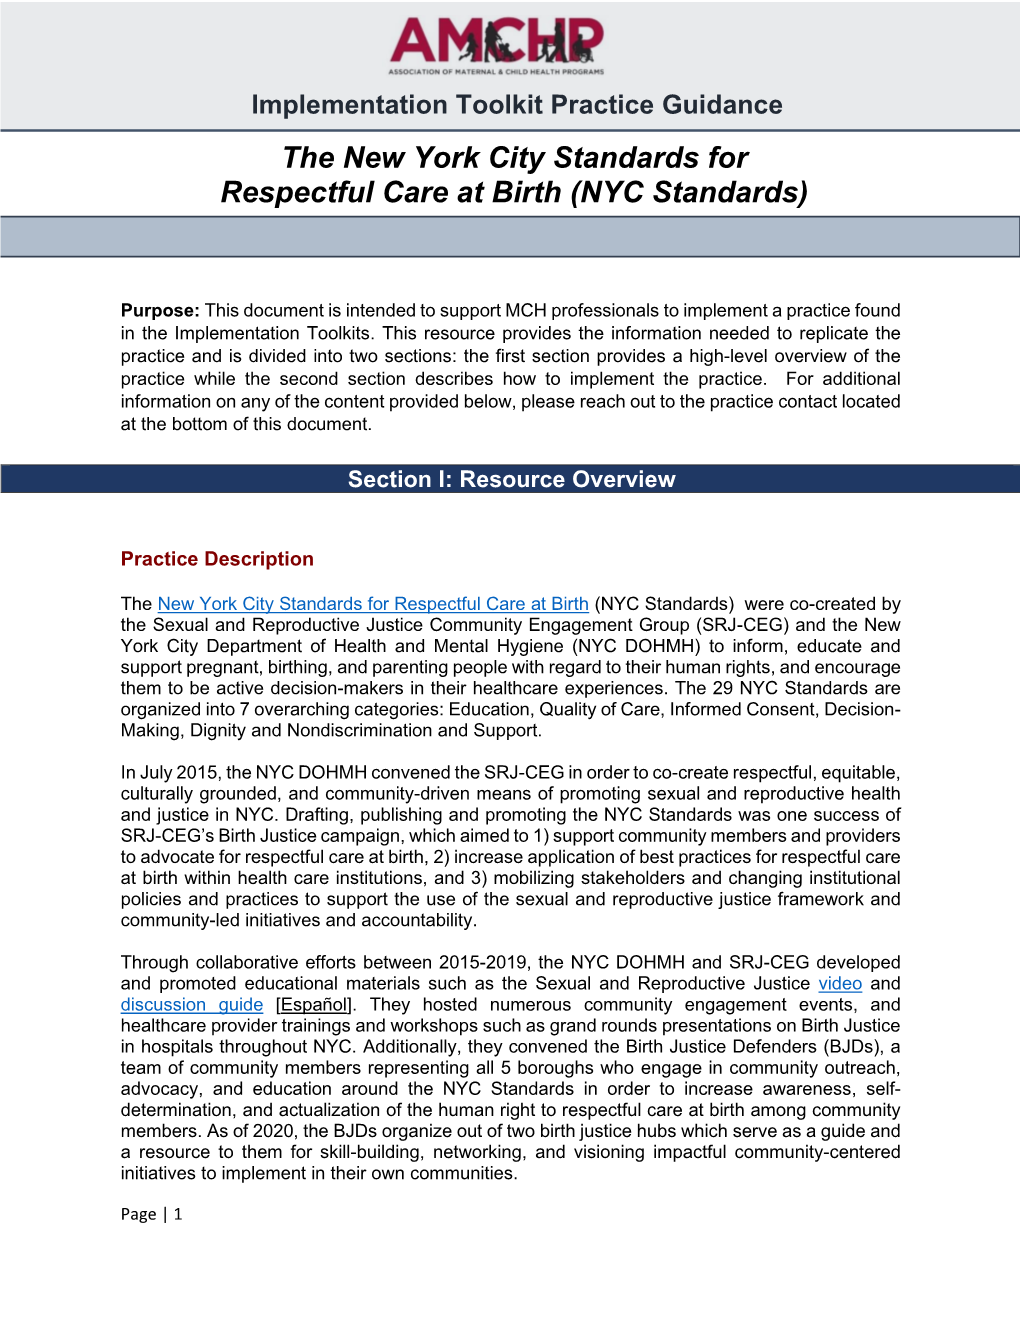 The New York City Standards for Respectful Care at Birth (NYC Standards)